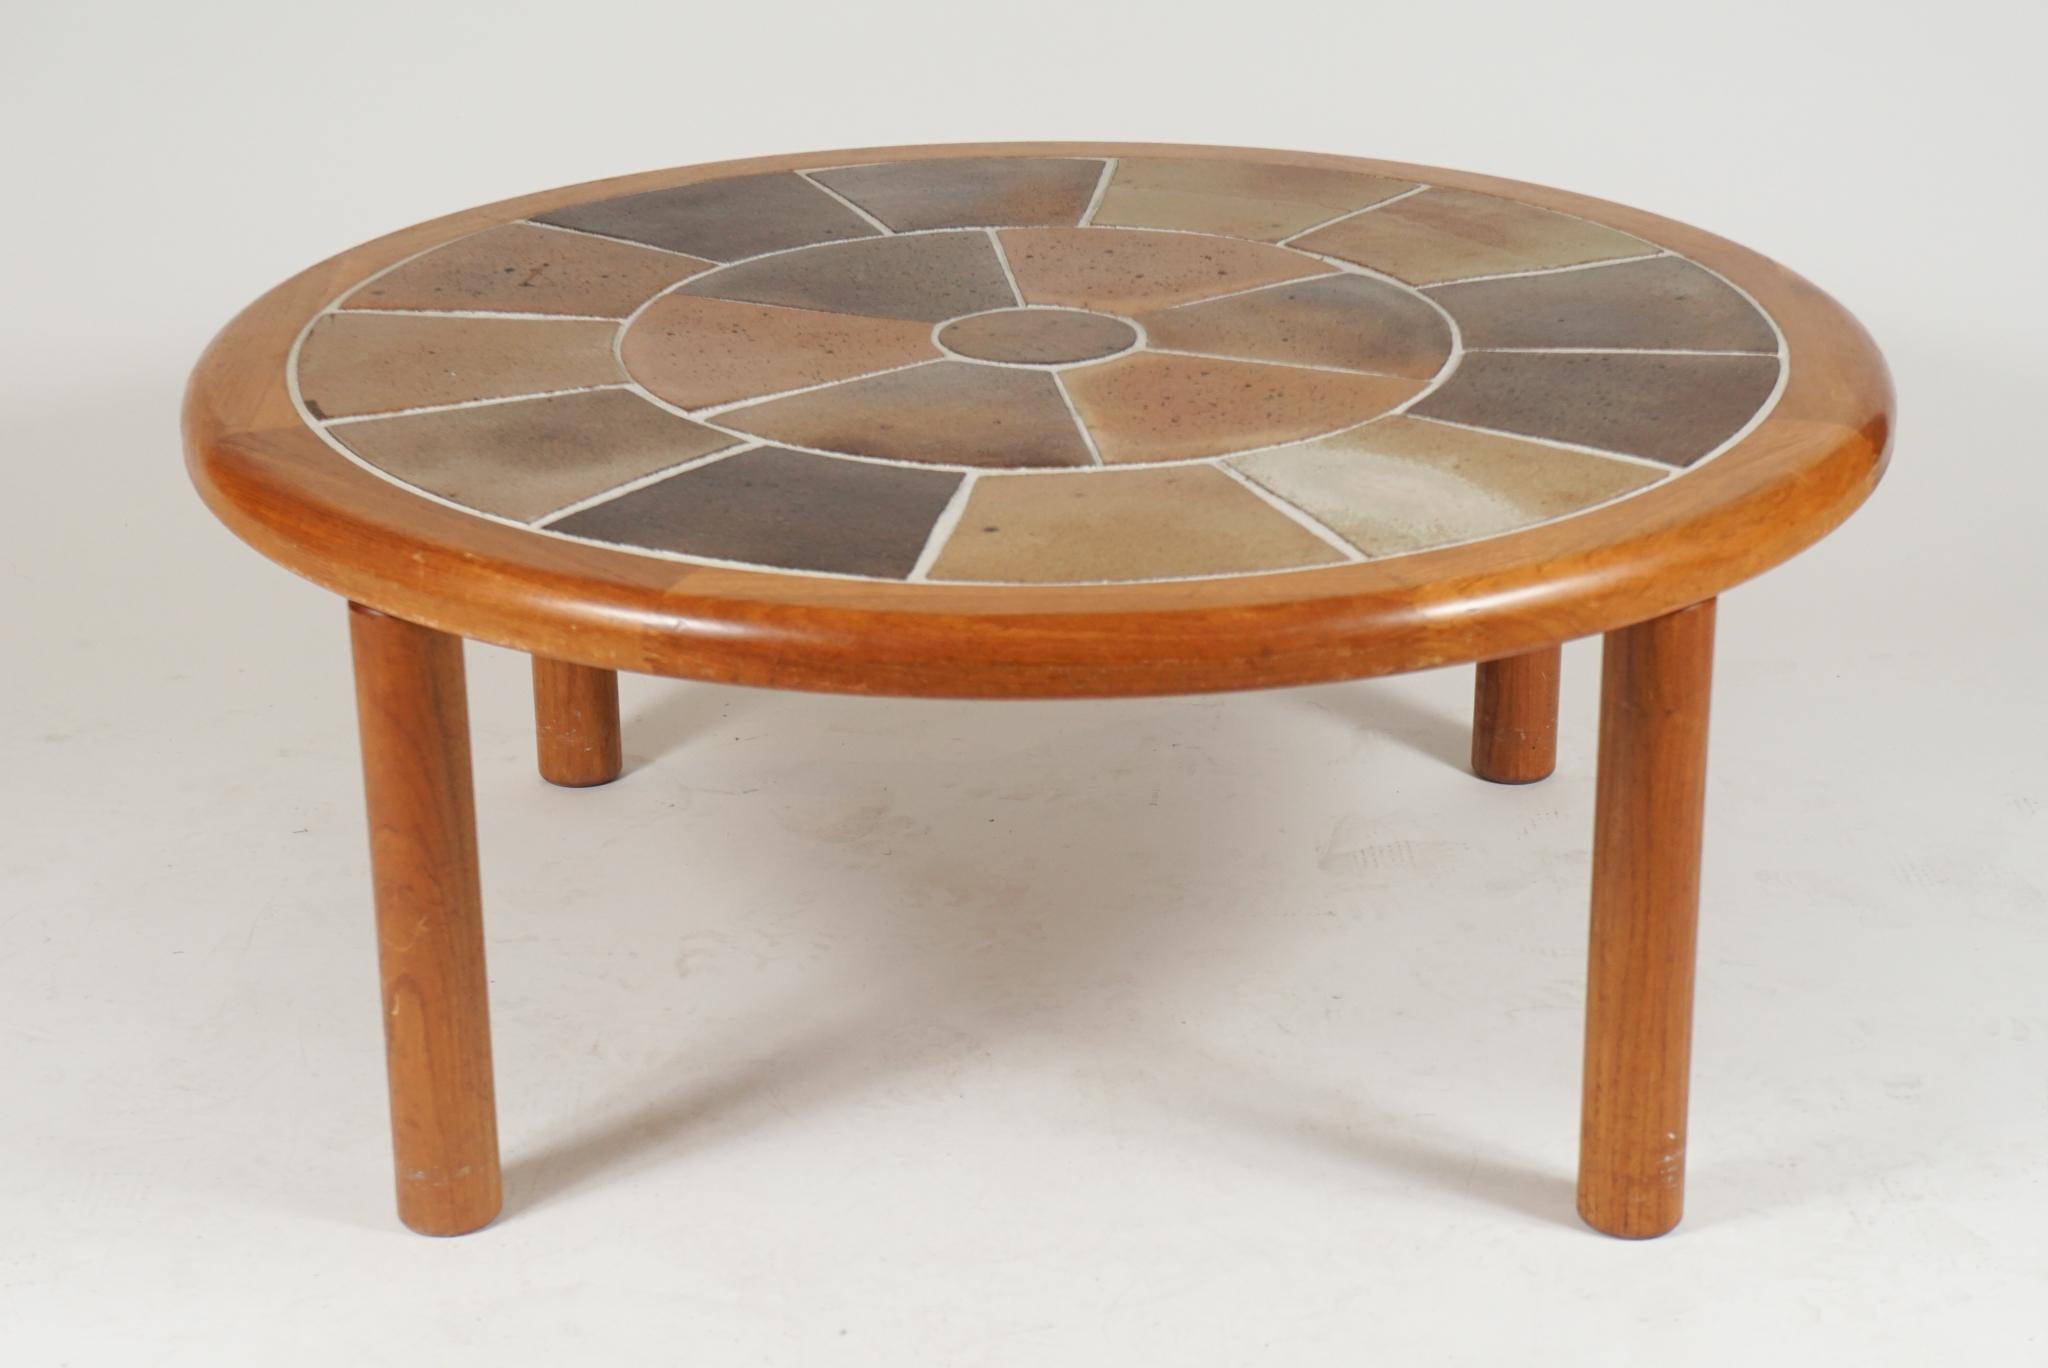 A great sized sturdy Danish teak coffee table with ceramic tile top. Very usable and stunning solid Danish coffee table. The table is designed by Tue Poulsen and labeled Haslev. Made in Denmark. Perfect for any 'Hygge' environment!